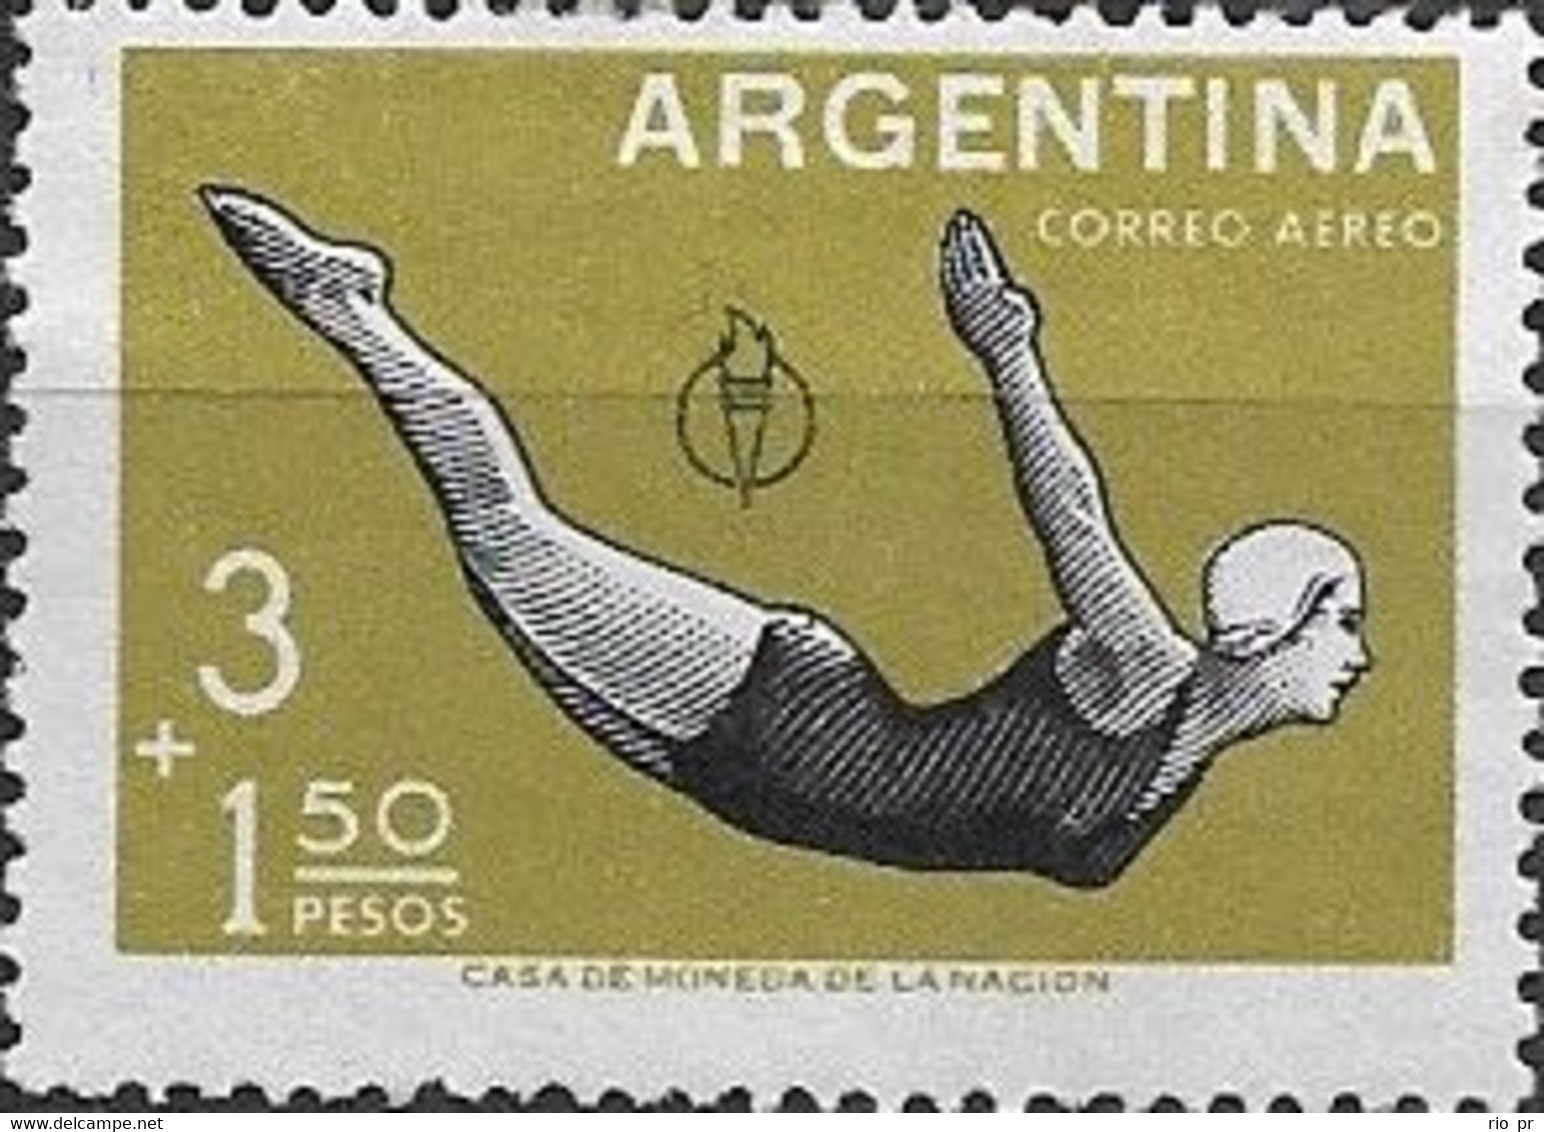 ARGENTINA - 3rd PANAMERICAN GAMES, CHICAGO/USA (DIVING) 1959 - MNH - Tauchen